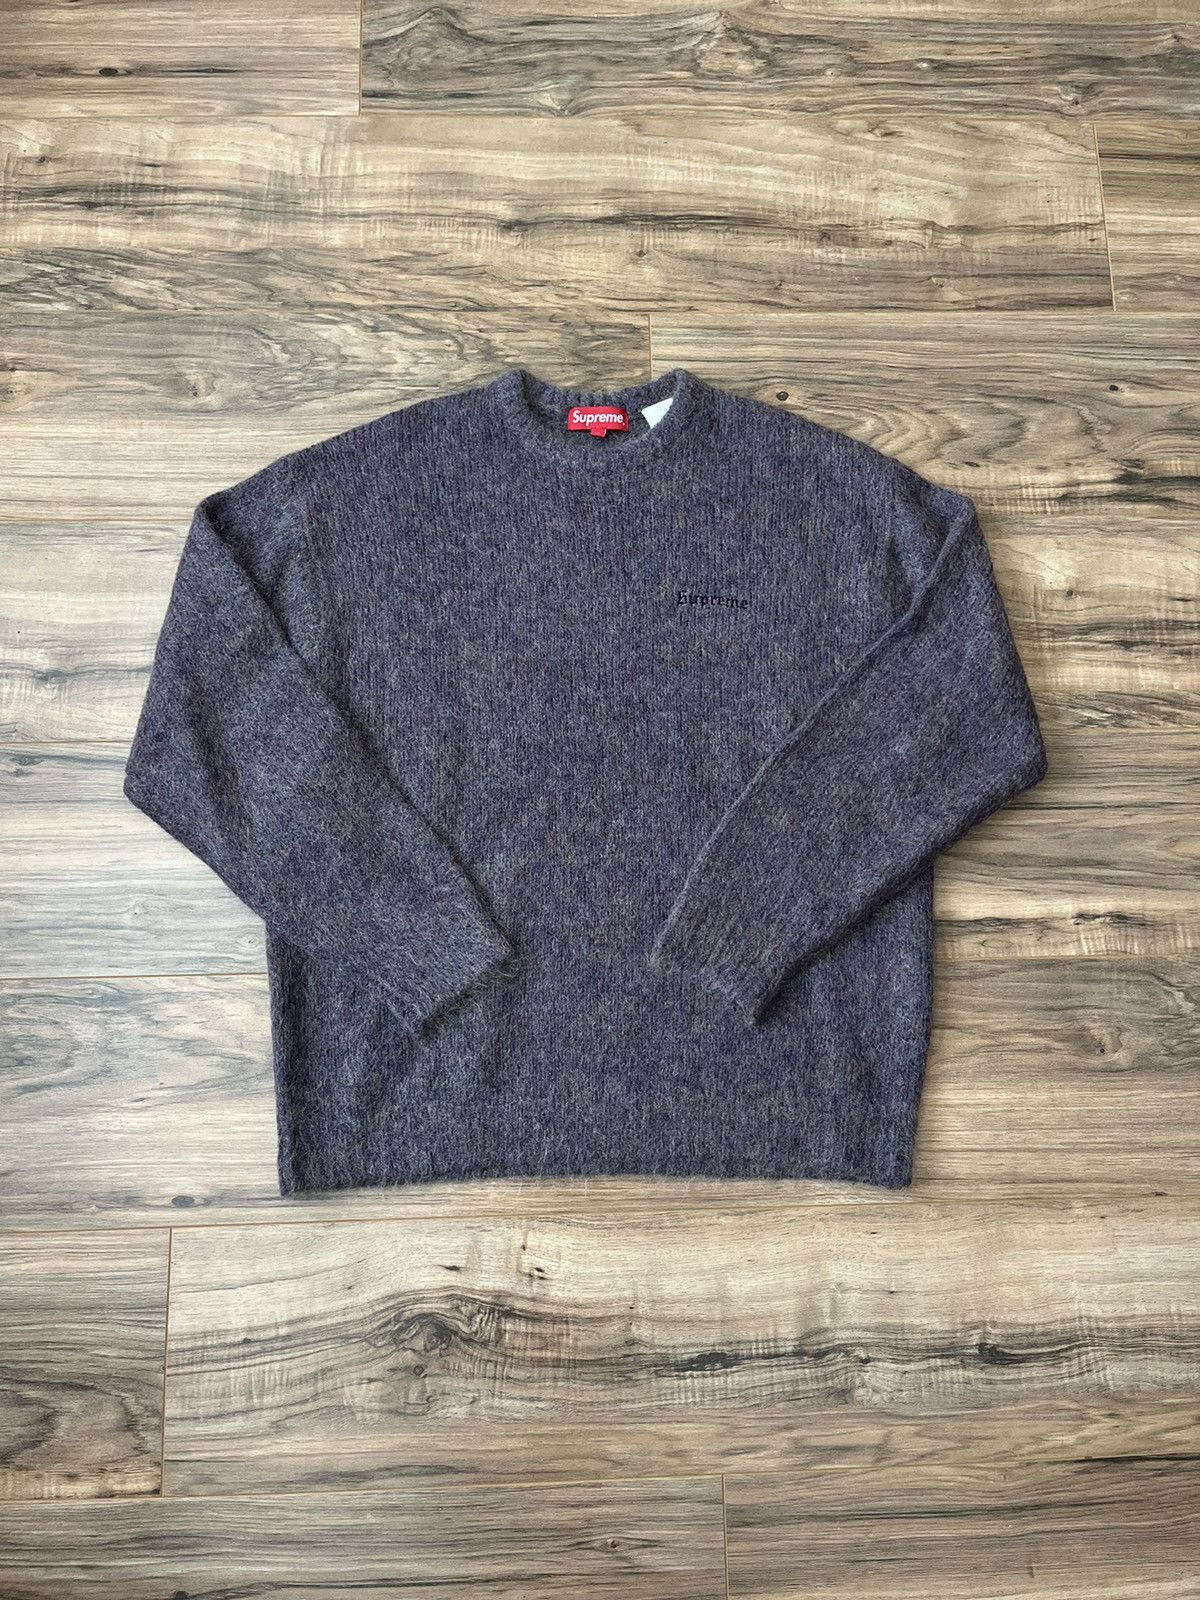 Supreme Mohair Sweater | Grailed